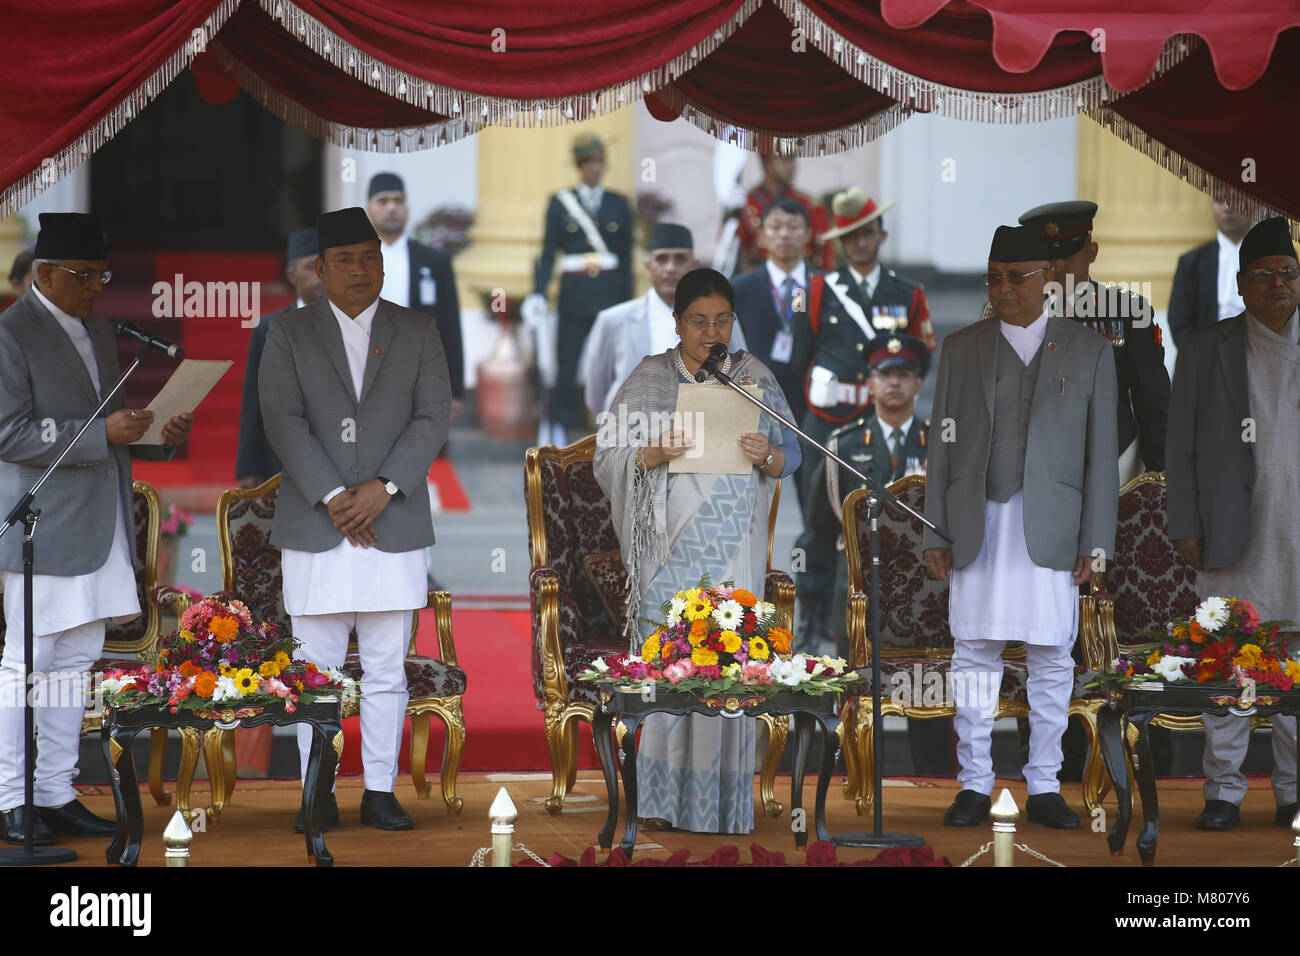 Kathmandu, Nepal. 14th Mar, 2018. President Bidhya Devi Bhandari takes her oath after being re-elected to a second term at the Presidential Office in Kathmandu, Nepal on Wednesday, March 14, 2018. Credit: Skanda Gautam/ZUMA Wire/Alamy Live News Stock Photo